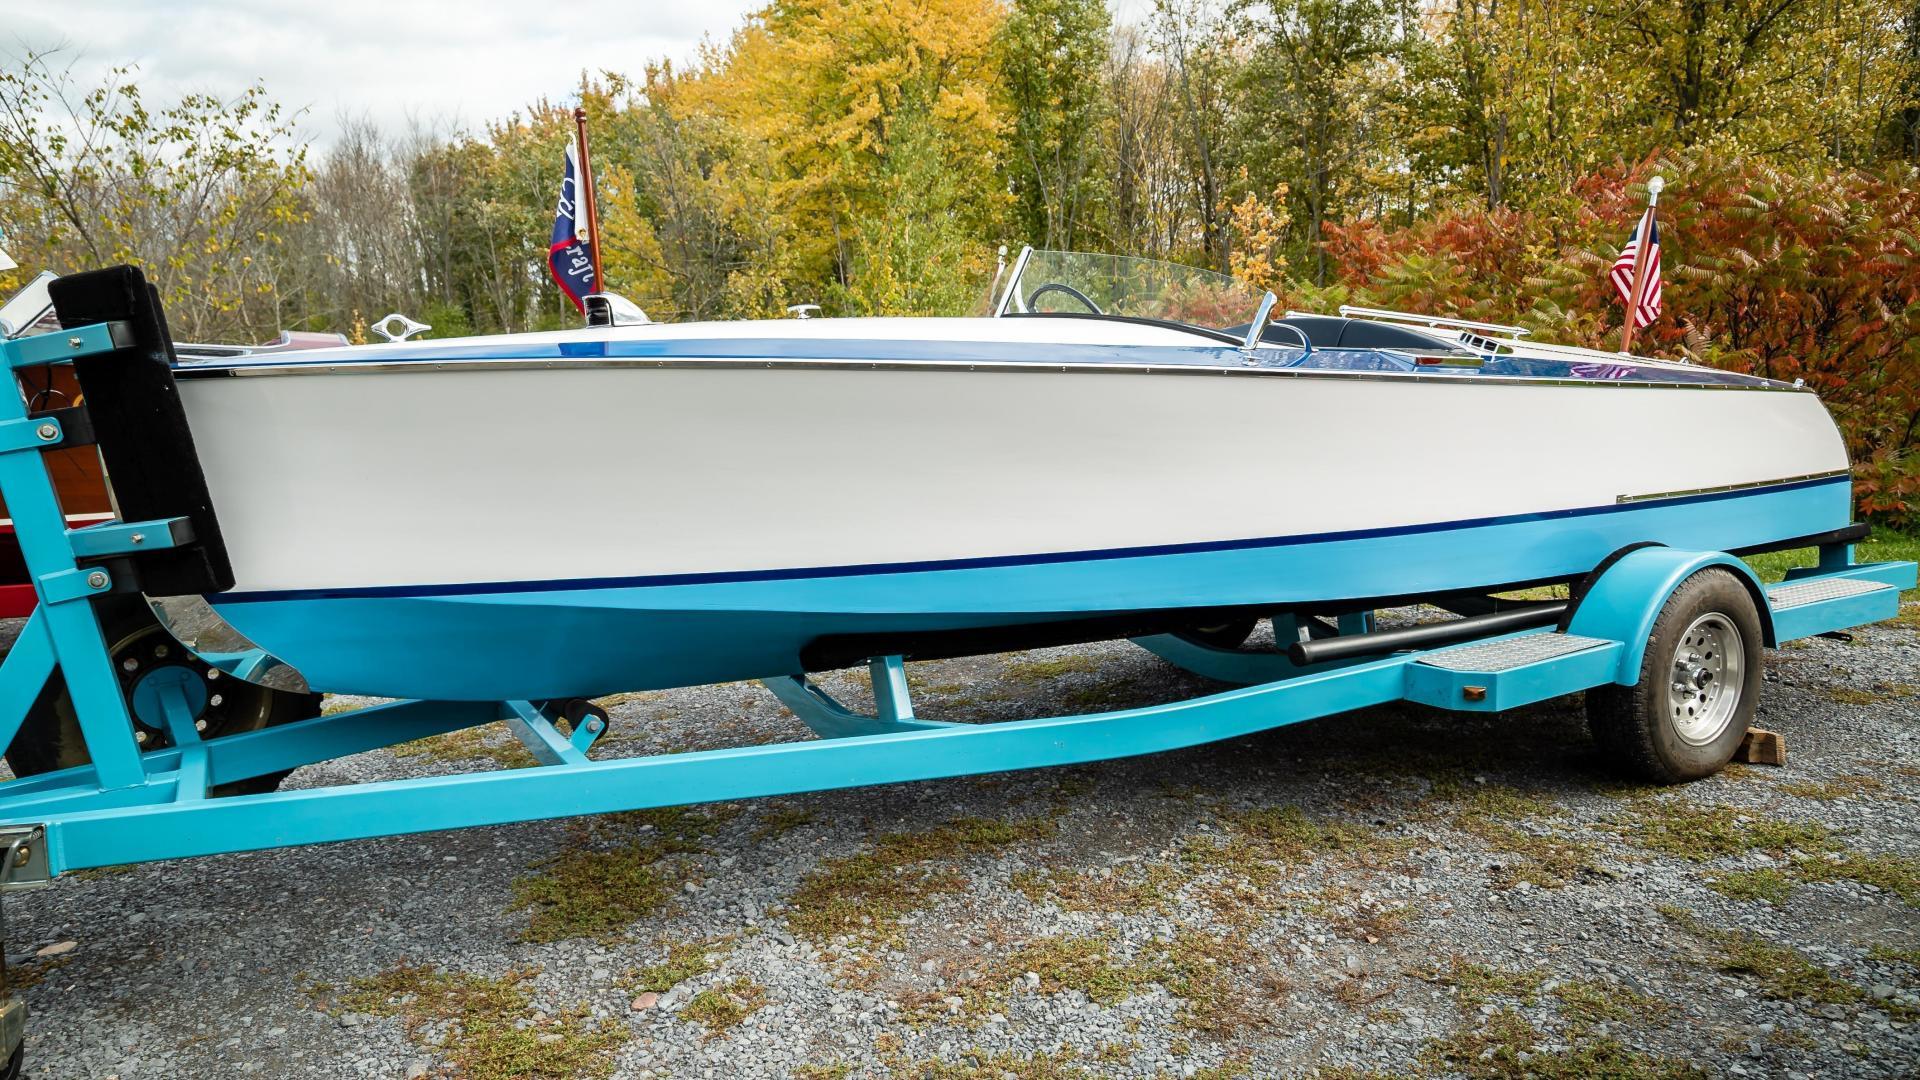 19' Chris-Craft Special Race boat